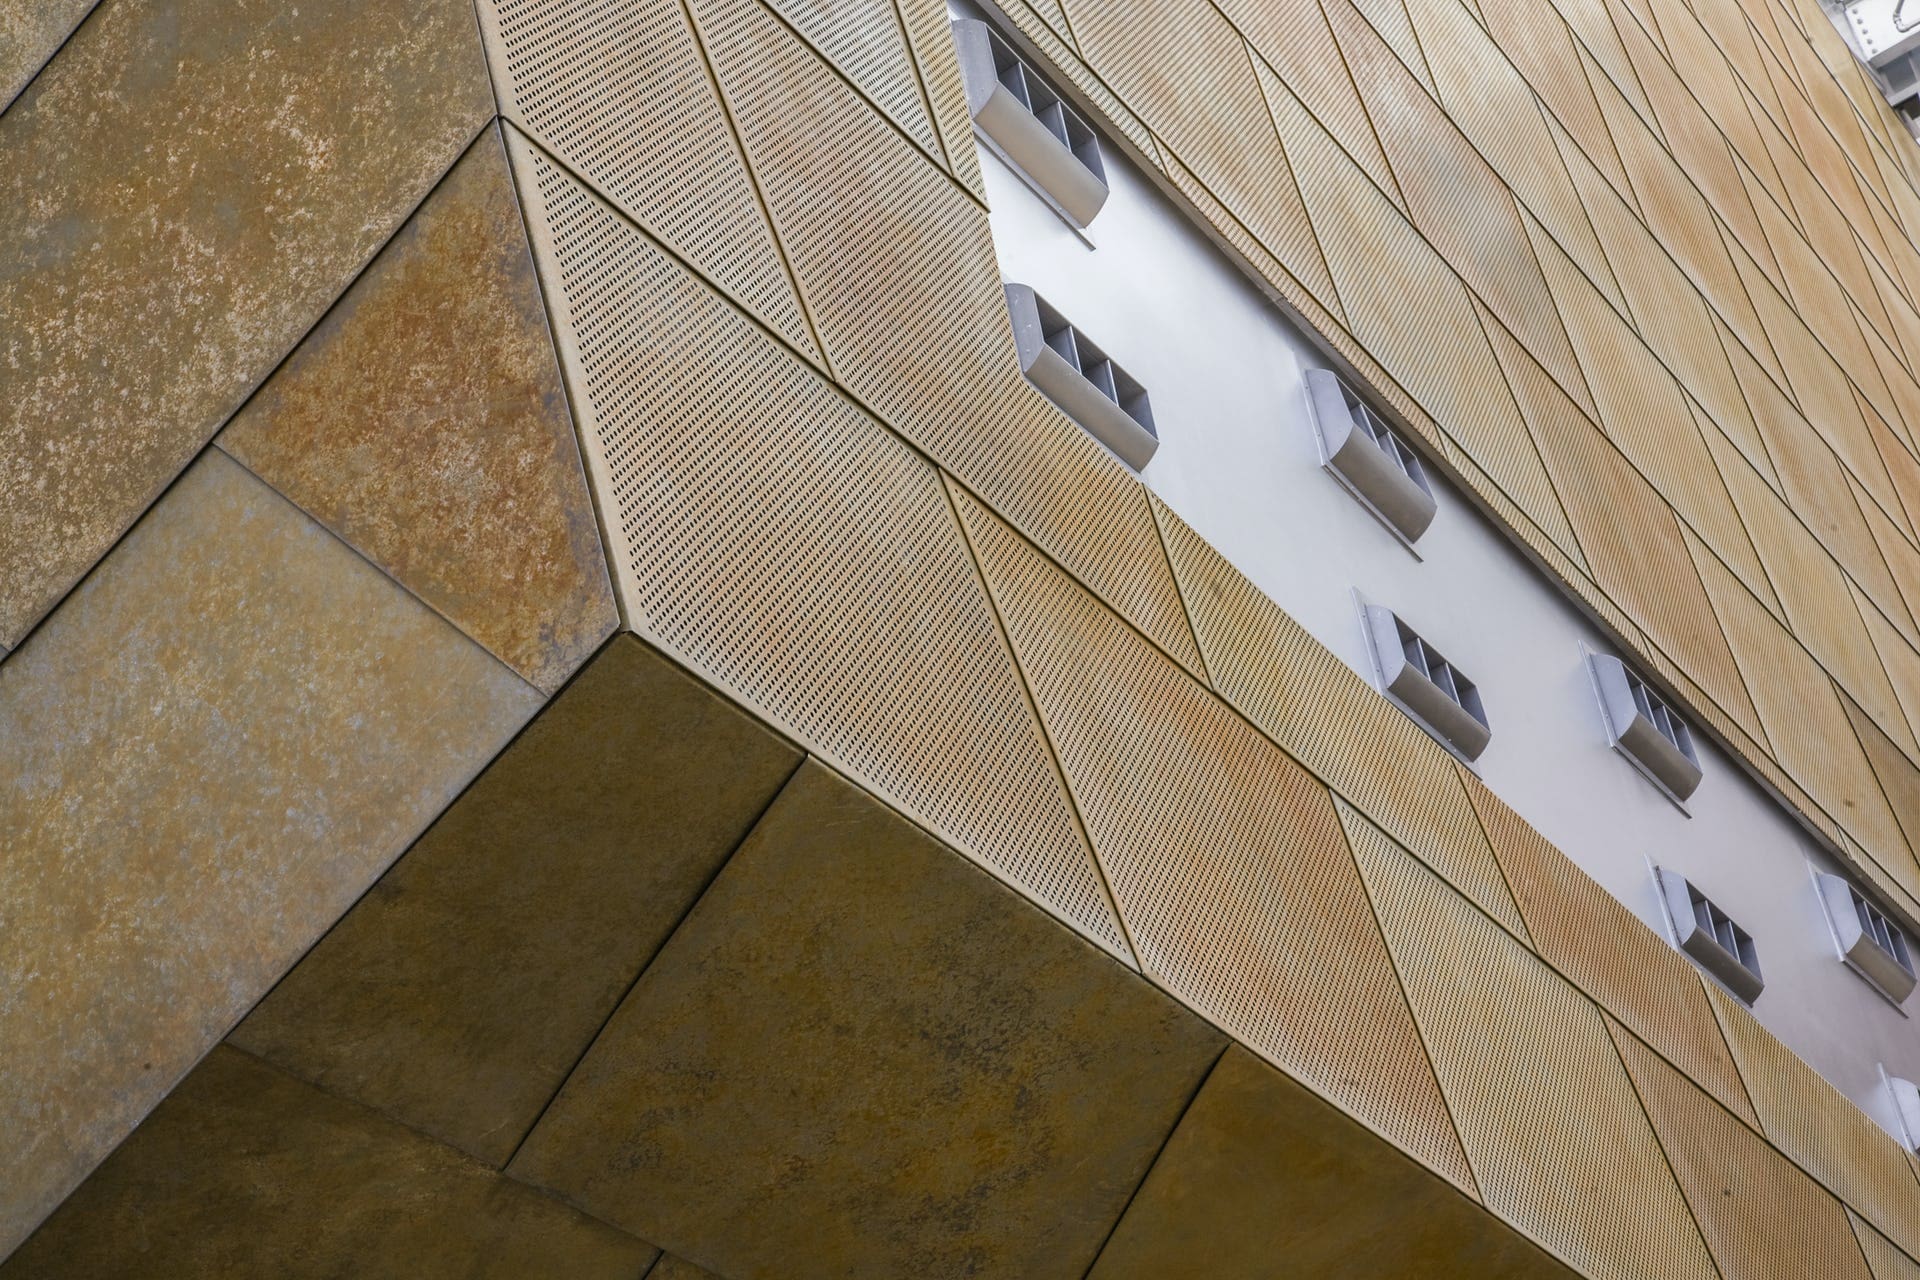 CUSTOM PERFORATED TRAPEZOIDAL PANEL SYSTEM FOR THE TAUBMAN MUSEUM OF ART.